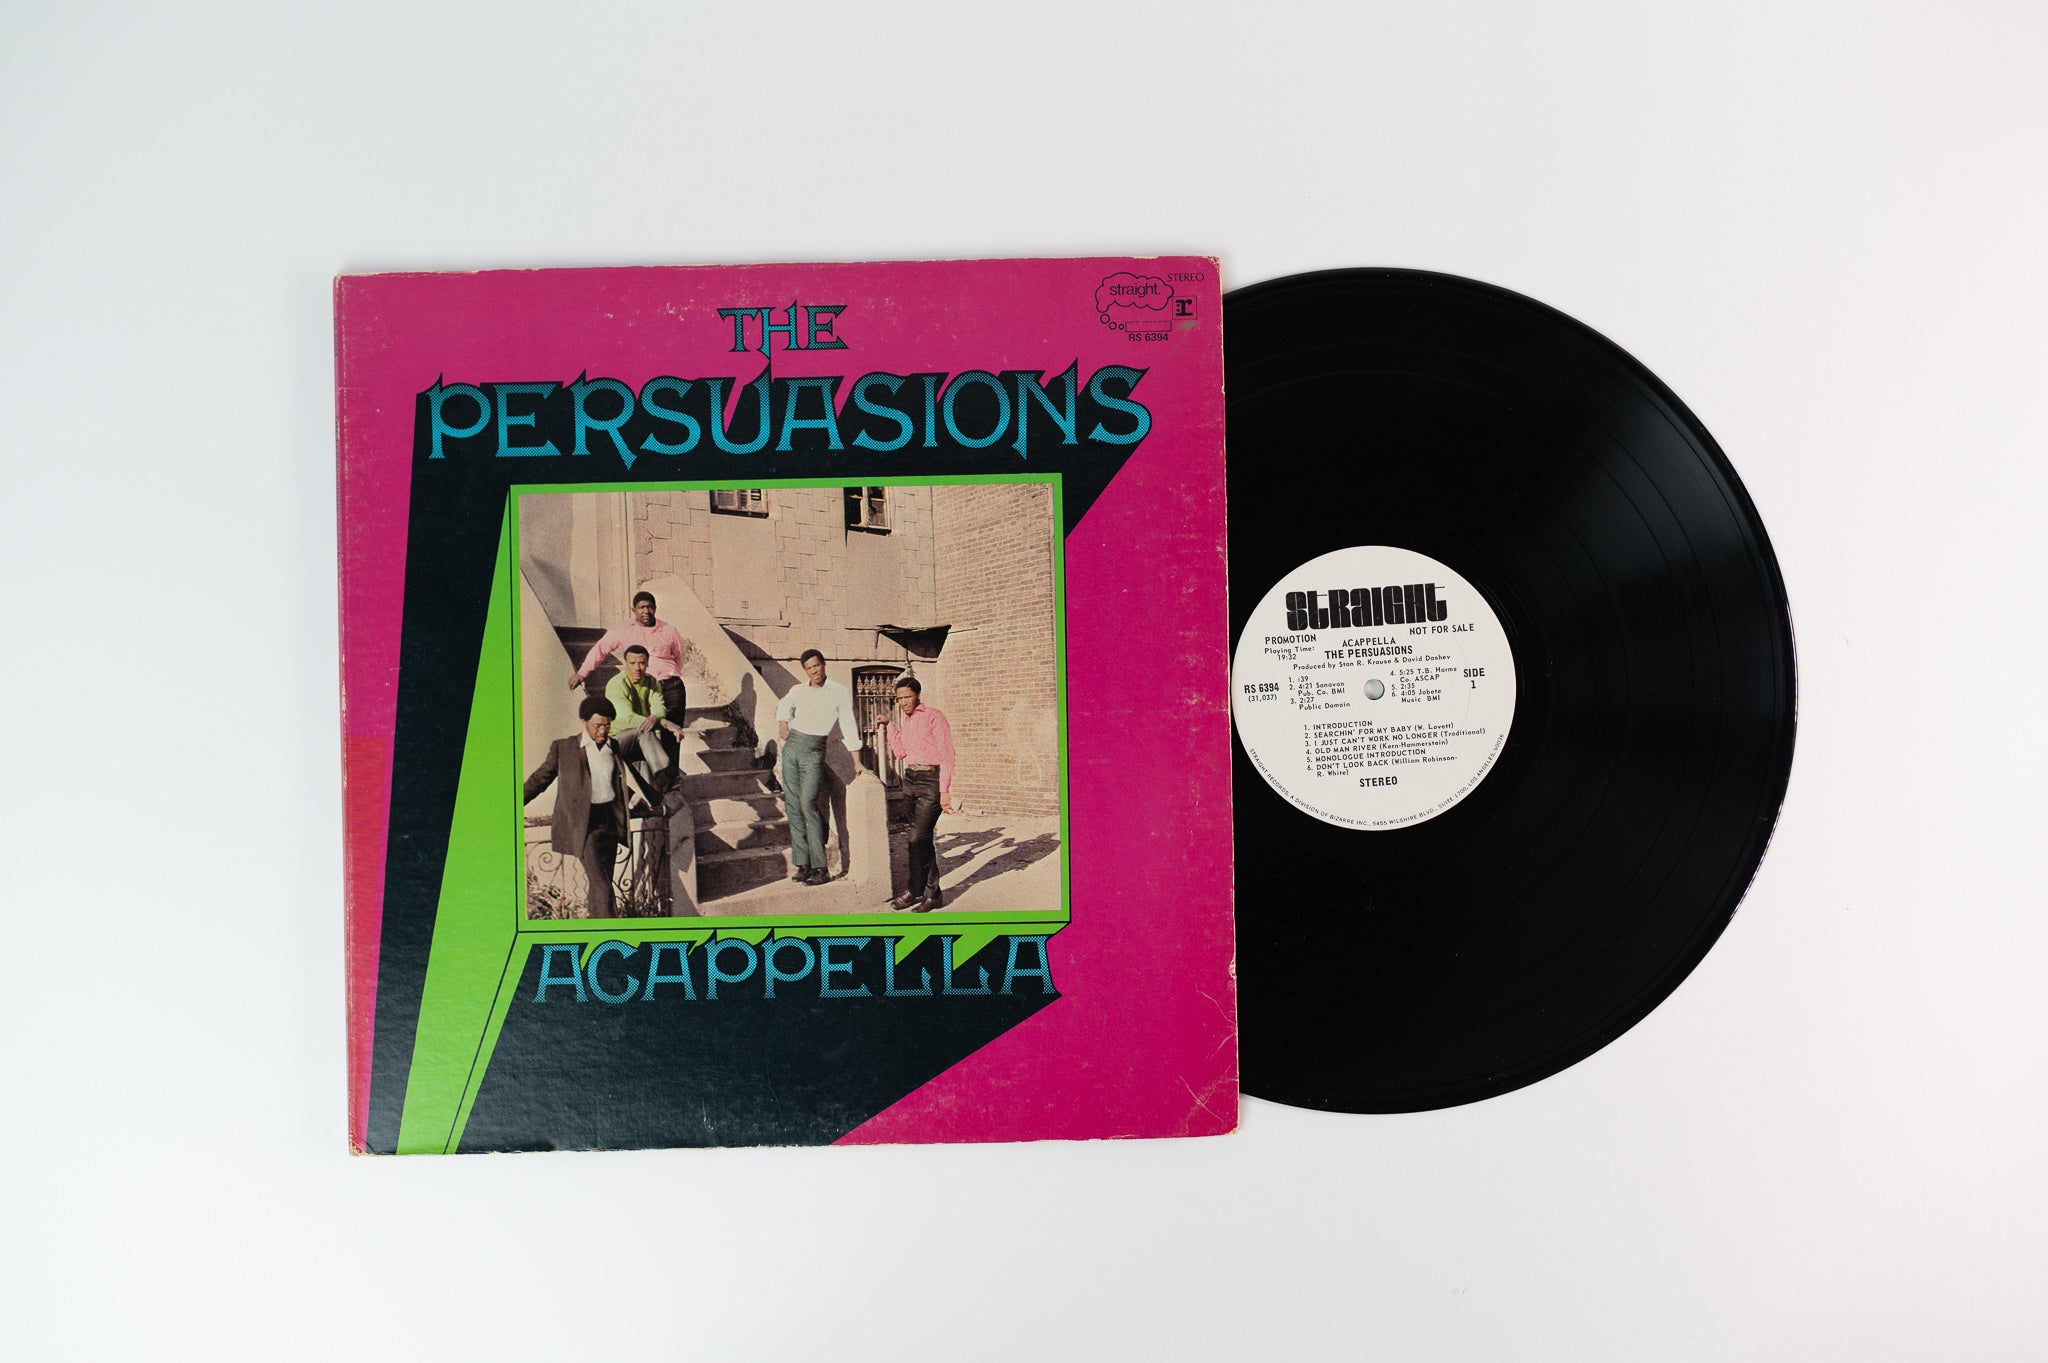 The Persuasions - Acappella on Straight Promo